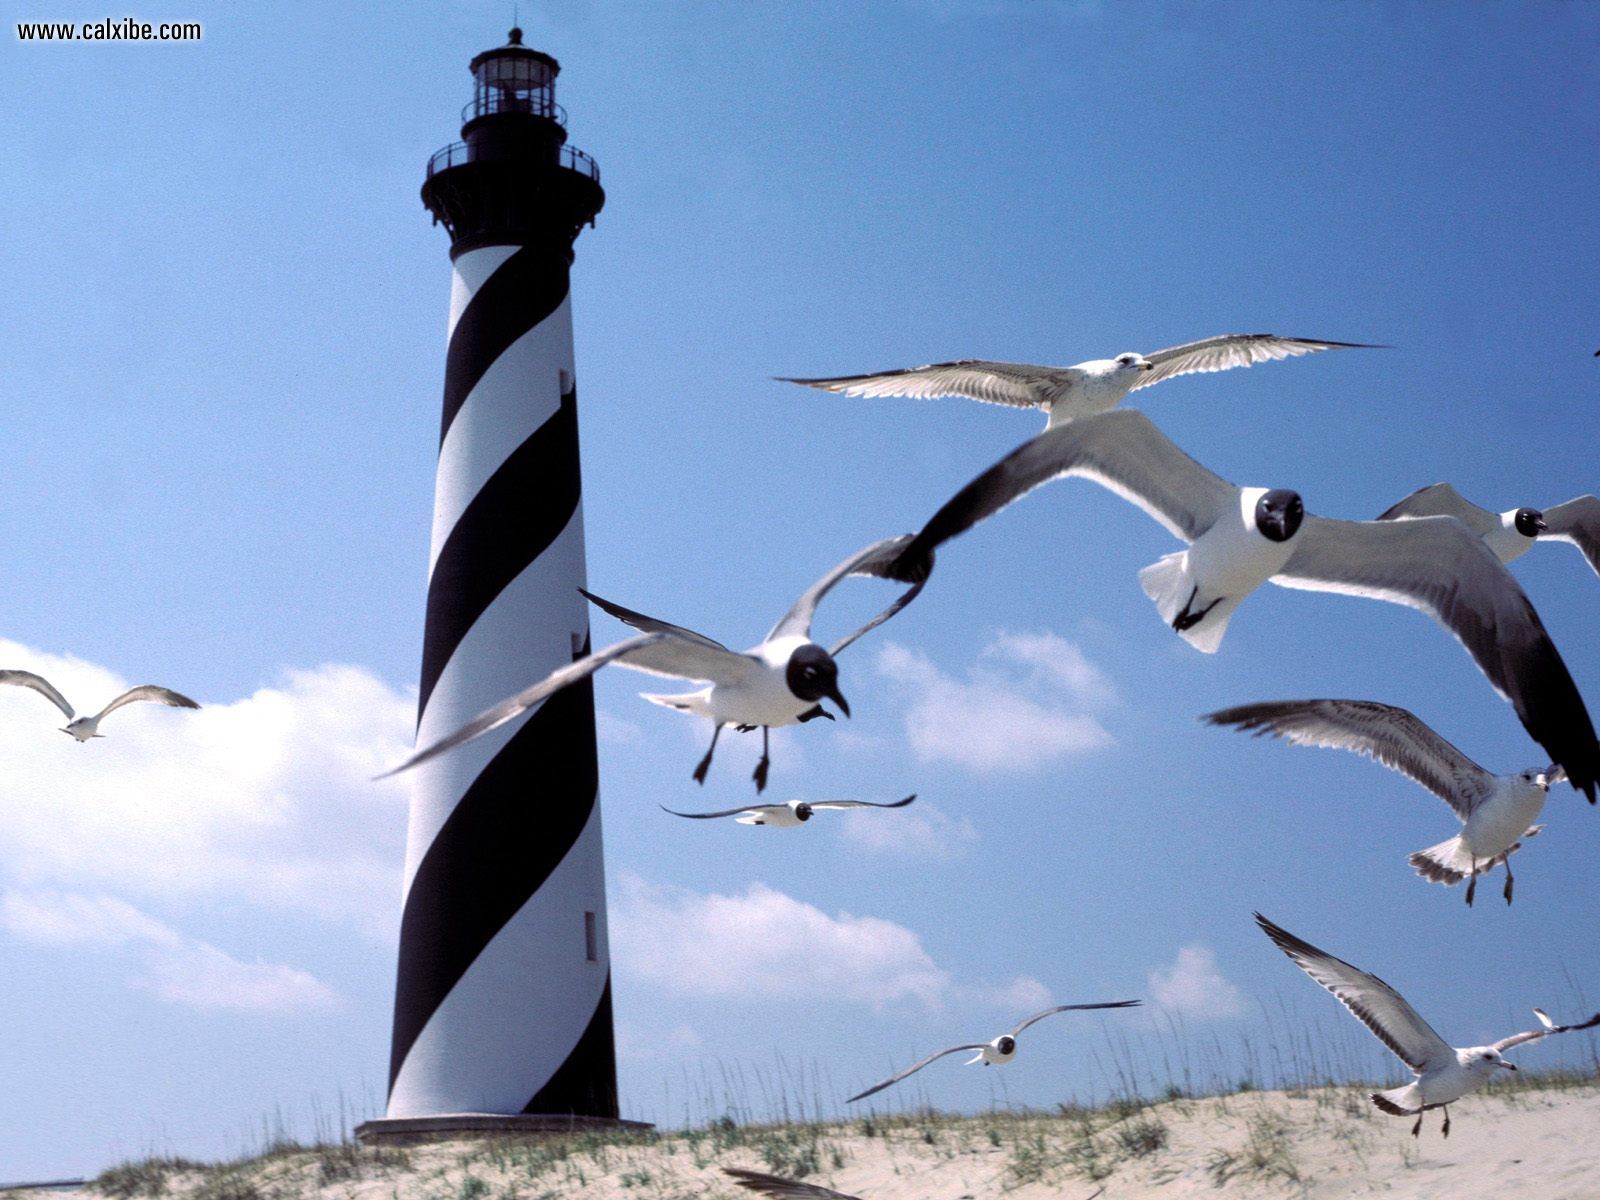  Cape Hatteras Lighthouse Outer Banks North Carolina in full screen